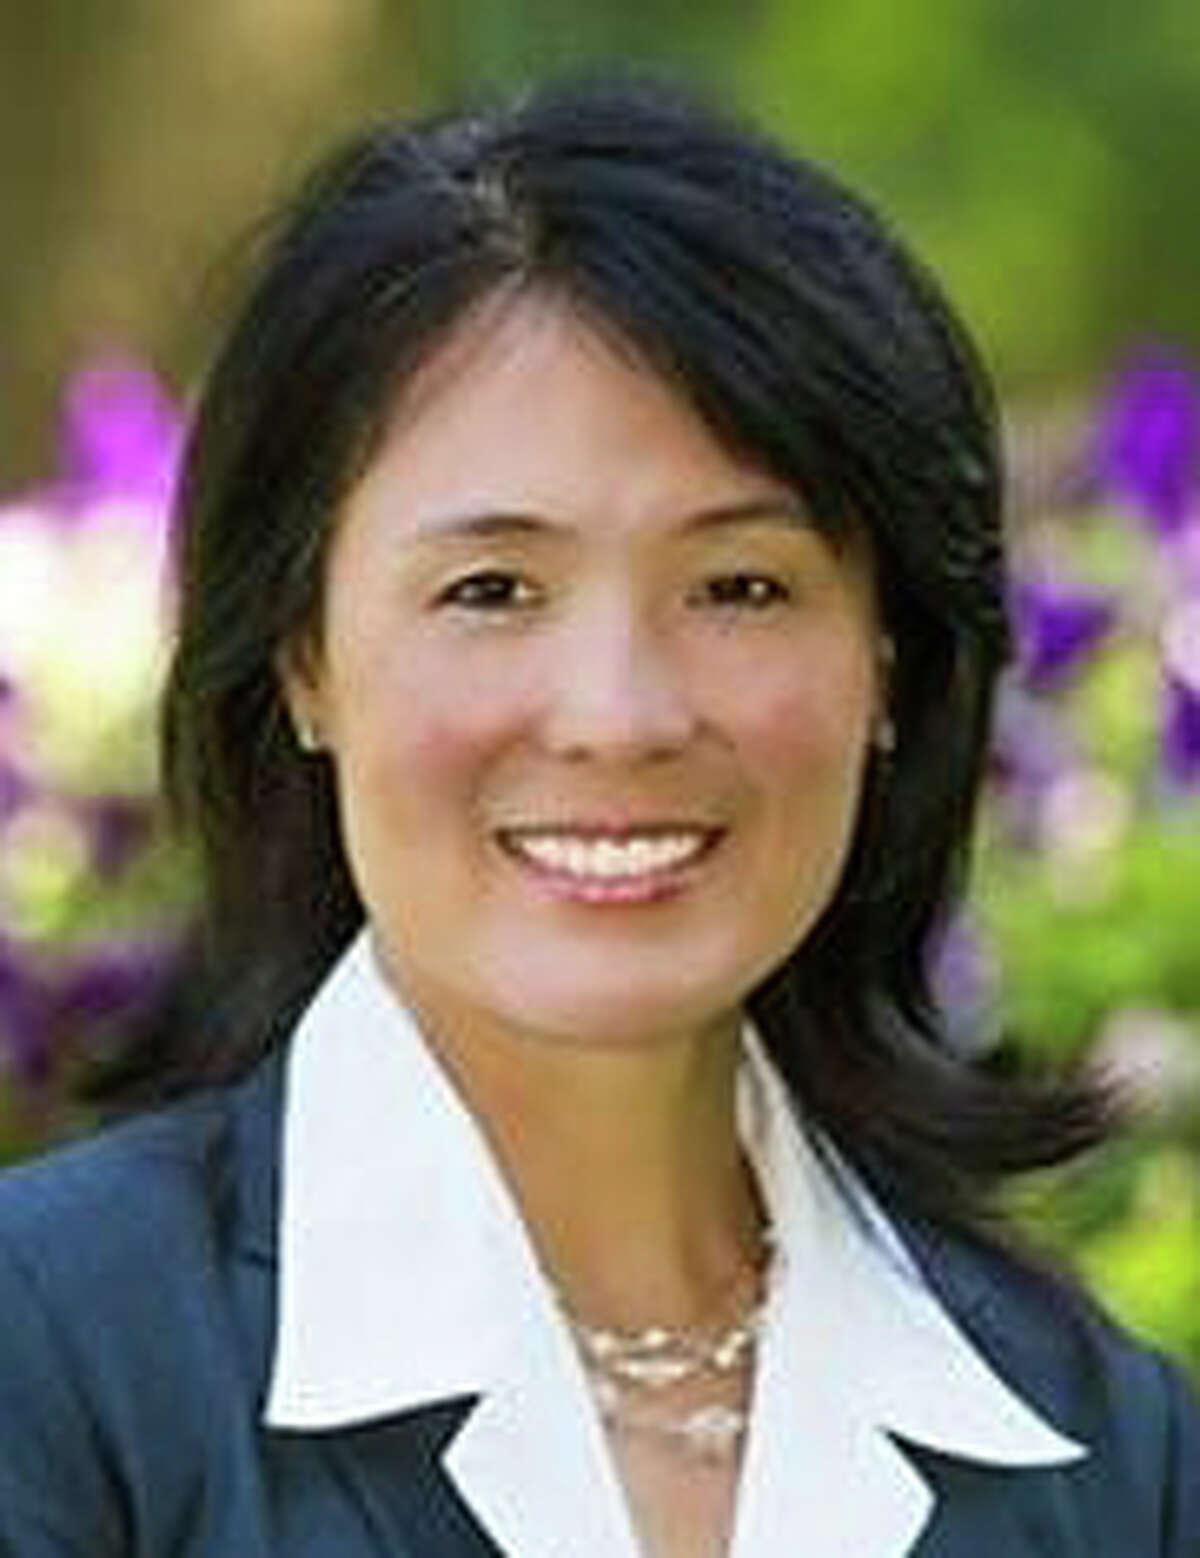 Eileen Liu-McCormack has announced her candidacy for a Republican nomination for Board of Education. July 2013. Fairfield CT.